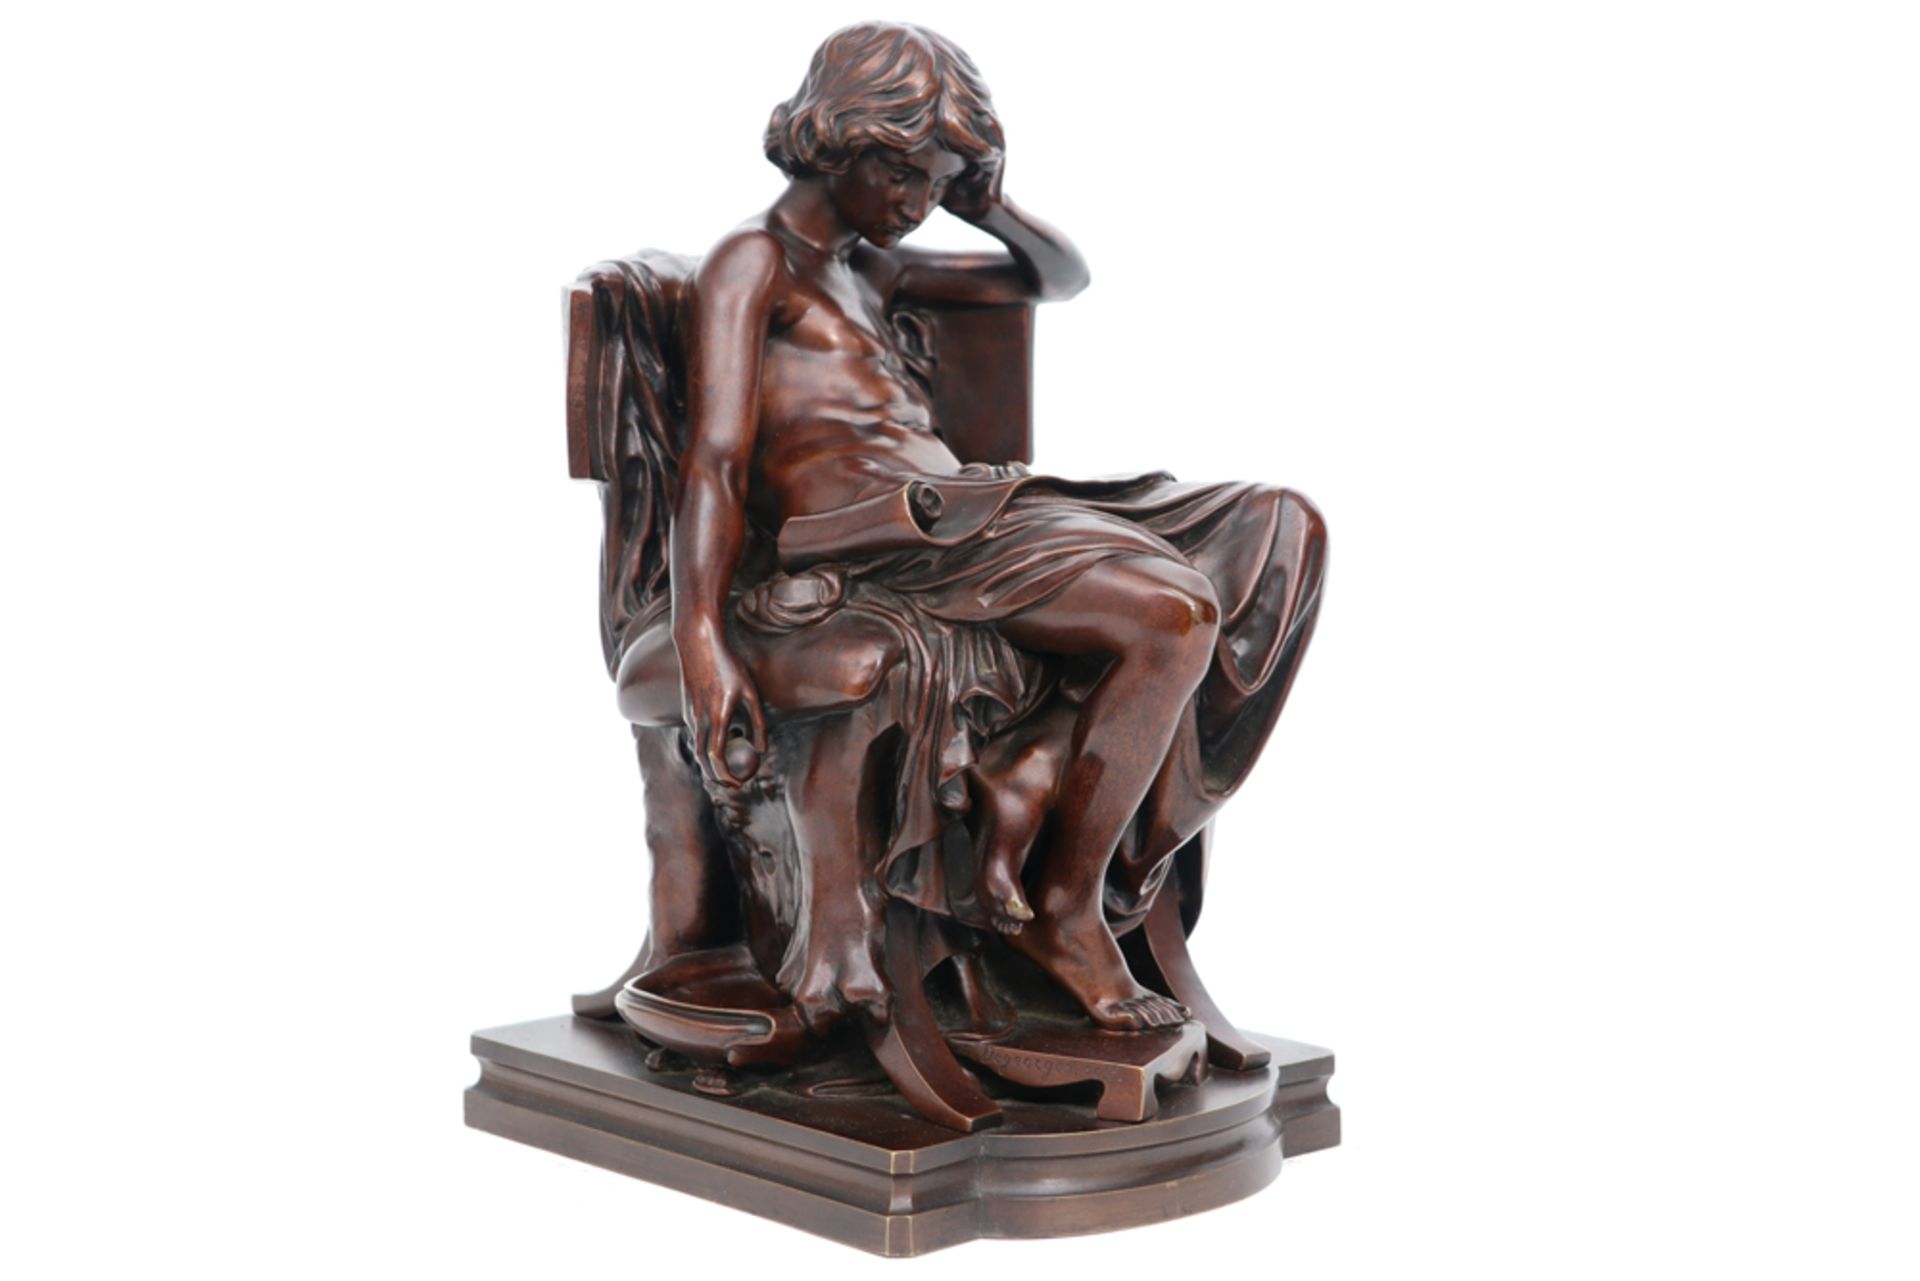 quite rare antique "Young Aristoteles" sculpture in bronze - signed Charles JM Degeorge and with